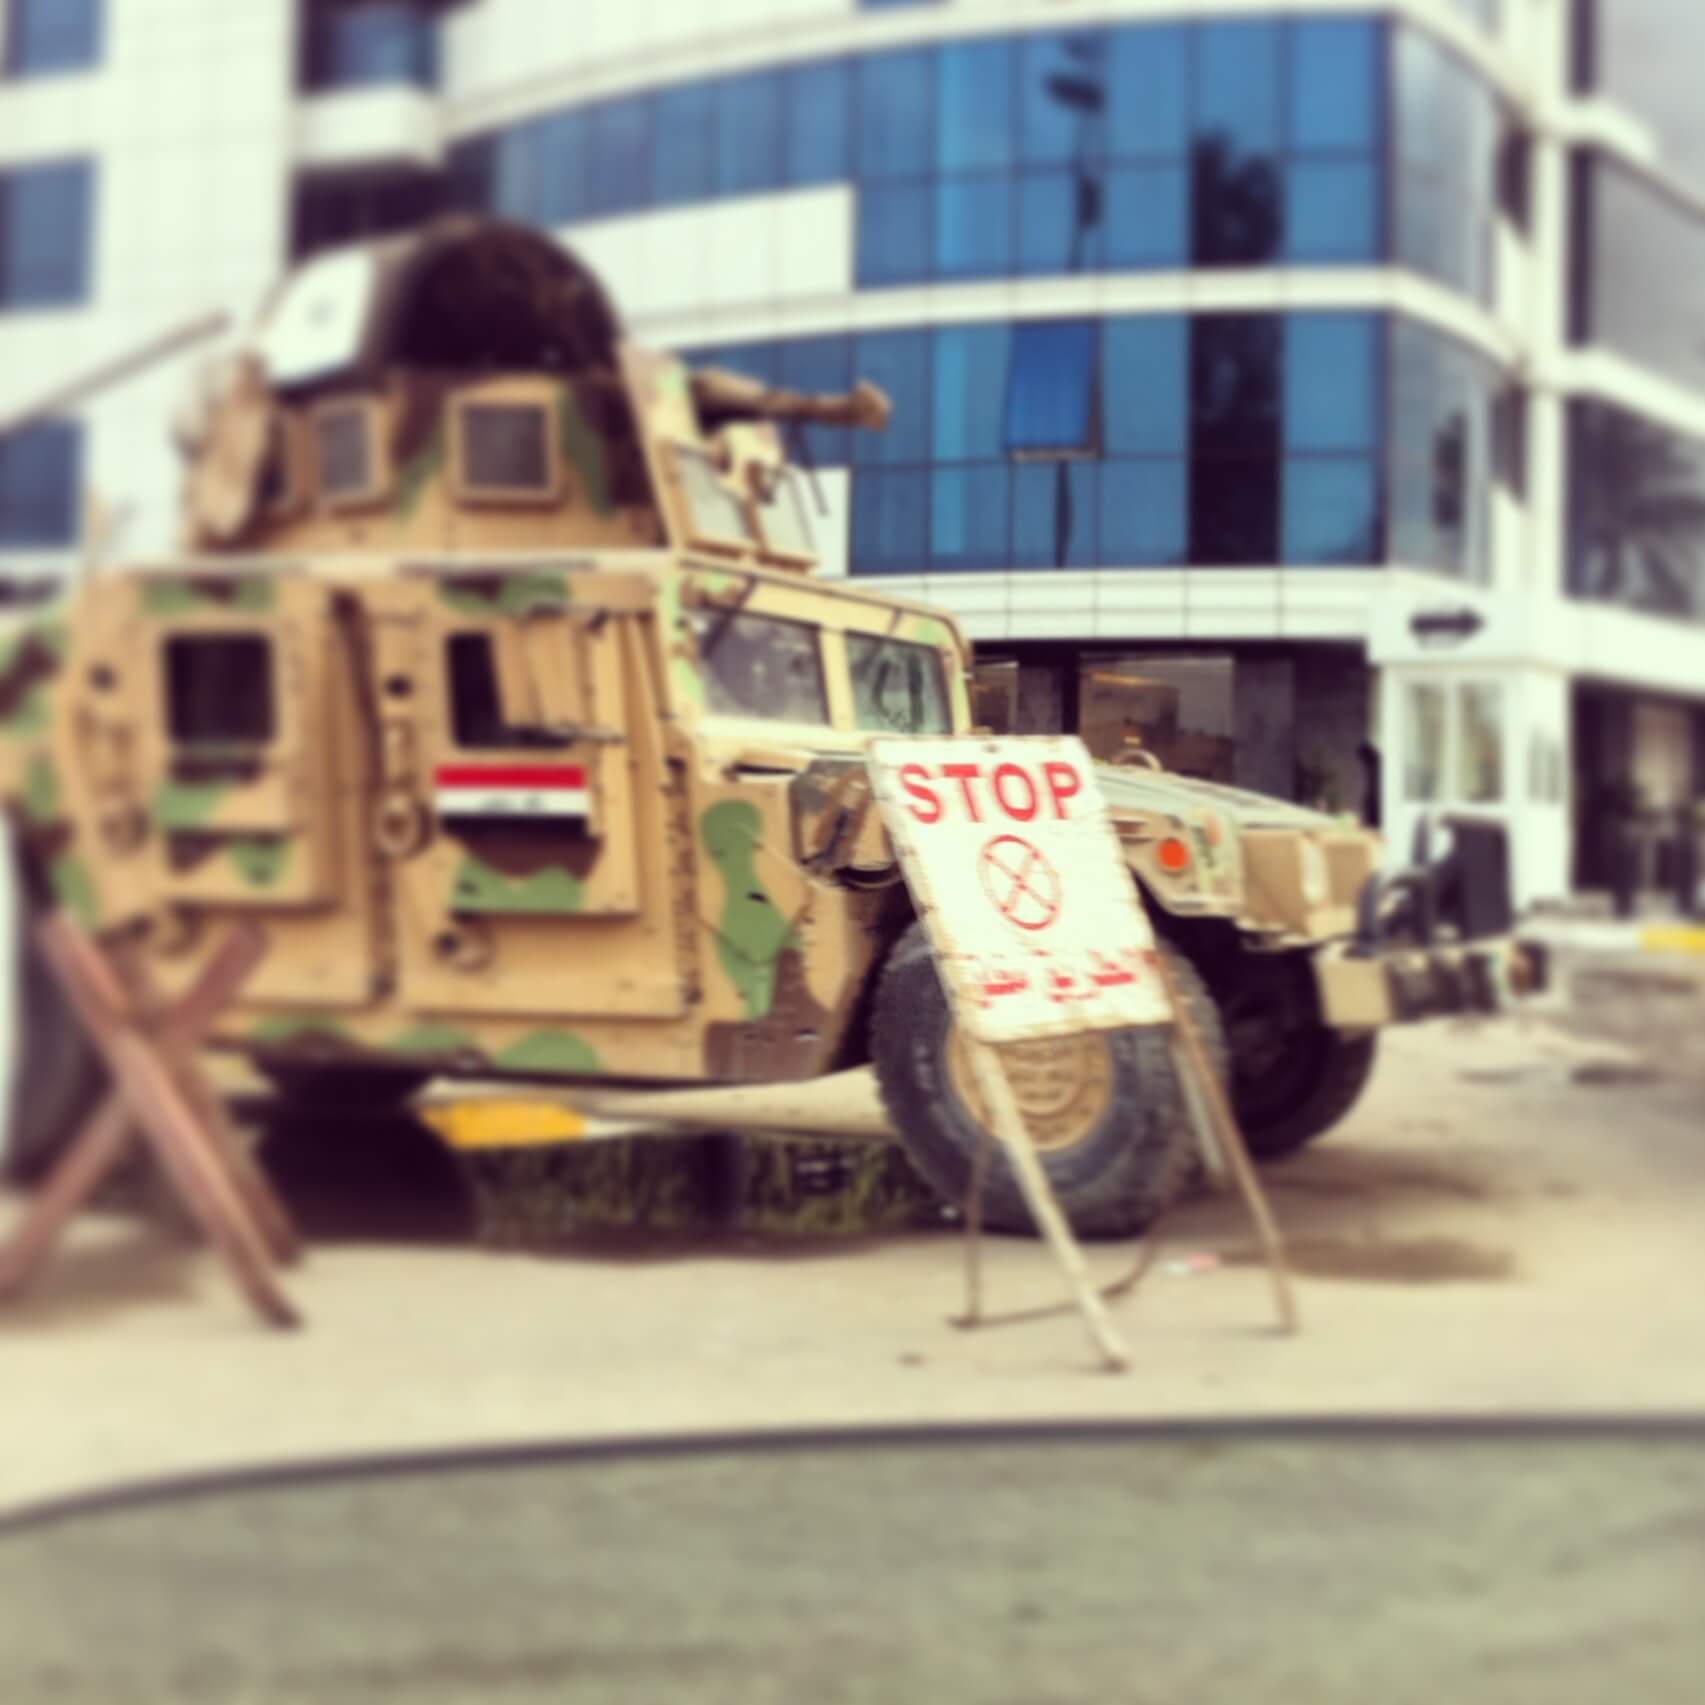 Iraqi Army tanks used to slow down traffic at the check-points placed around Baghdad, 2012.